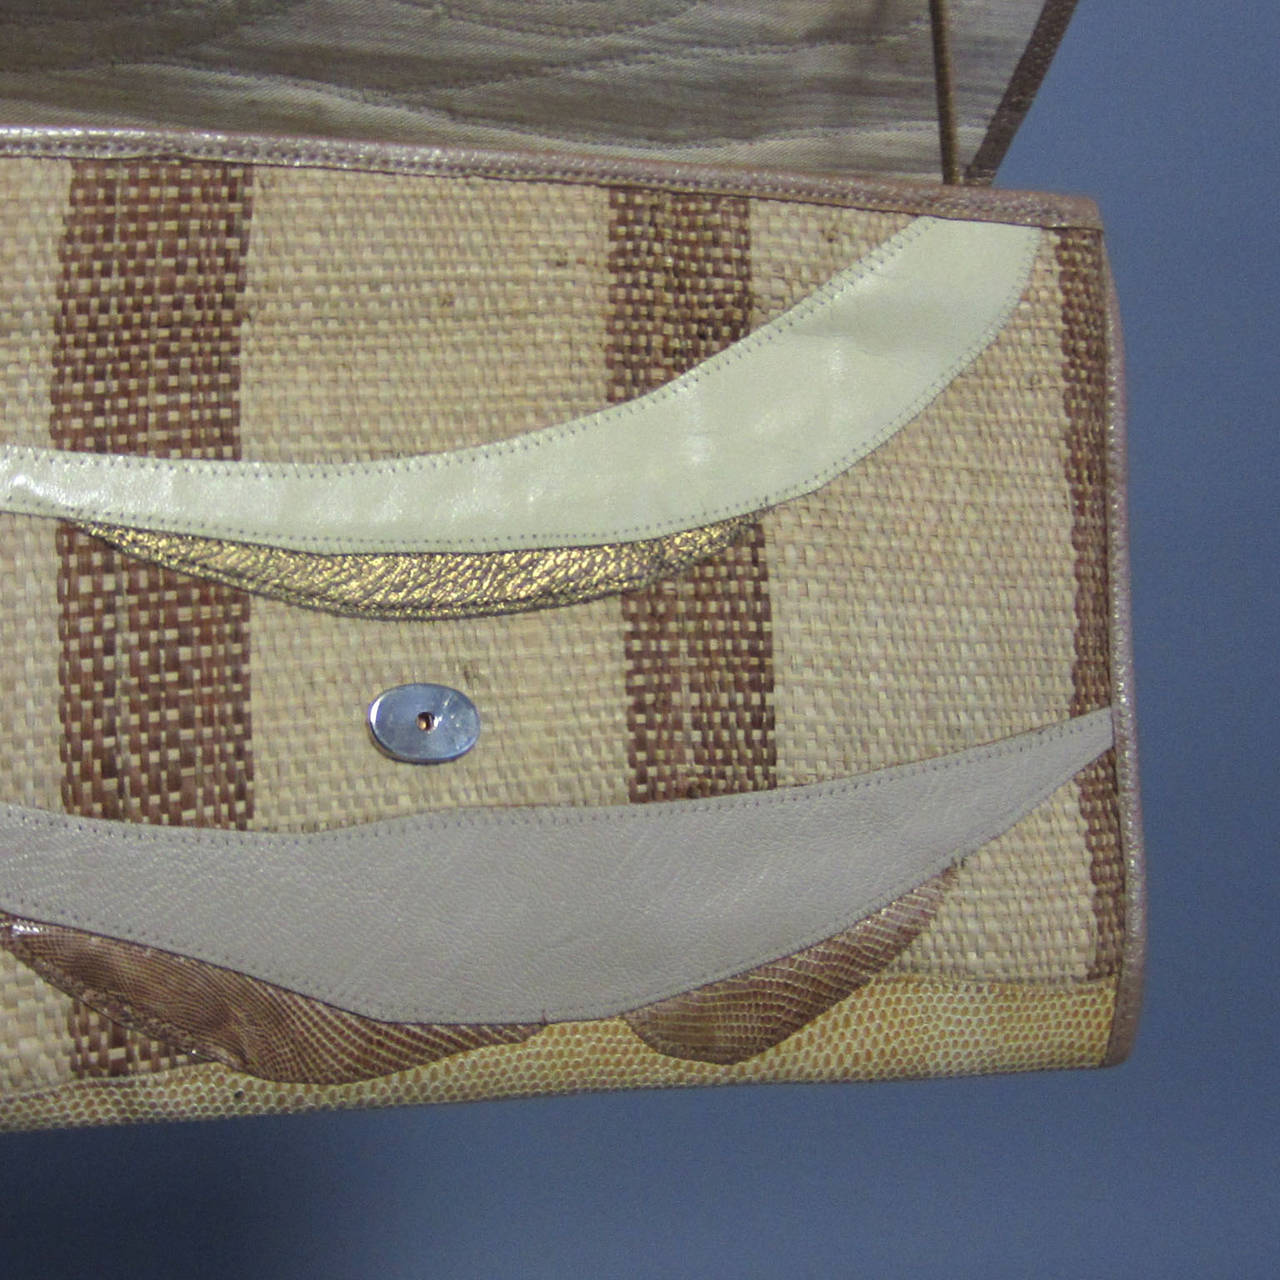 CARLOS FALCHI Raffia, Skin and Leather Crossbody Bag In Good Condition For Sale In New York, NY